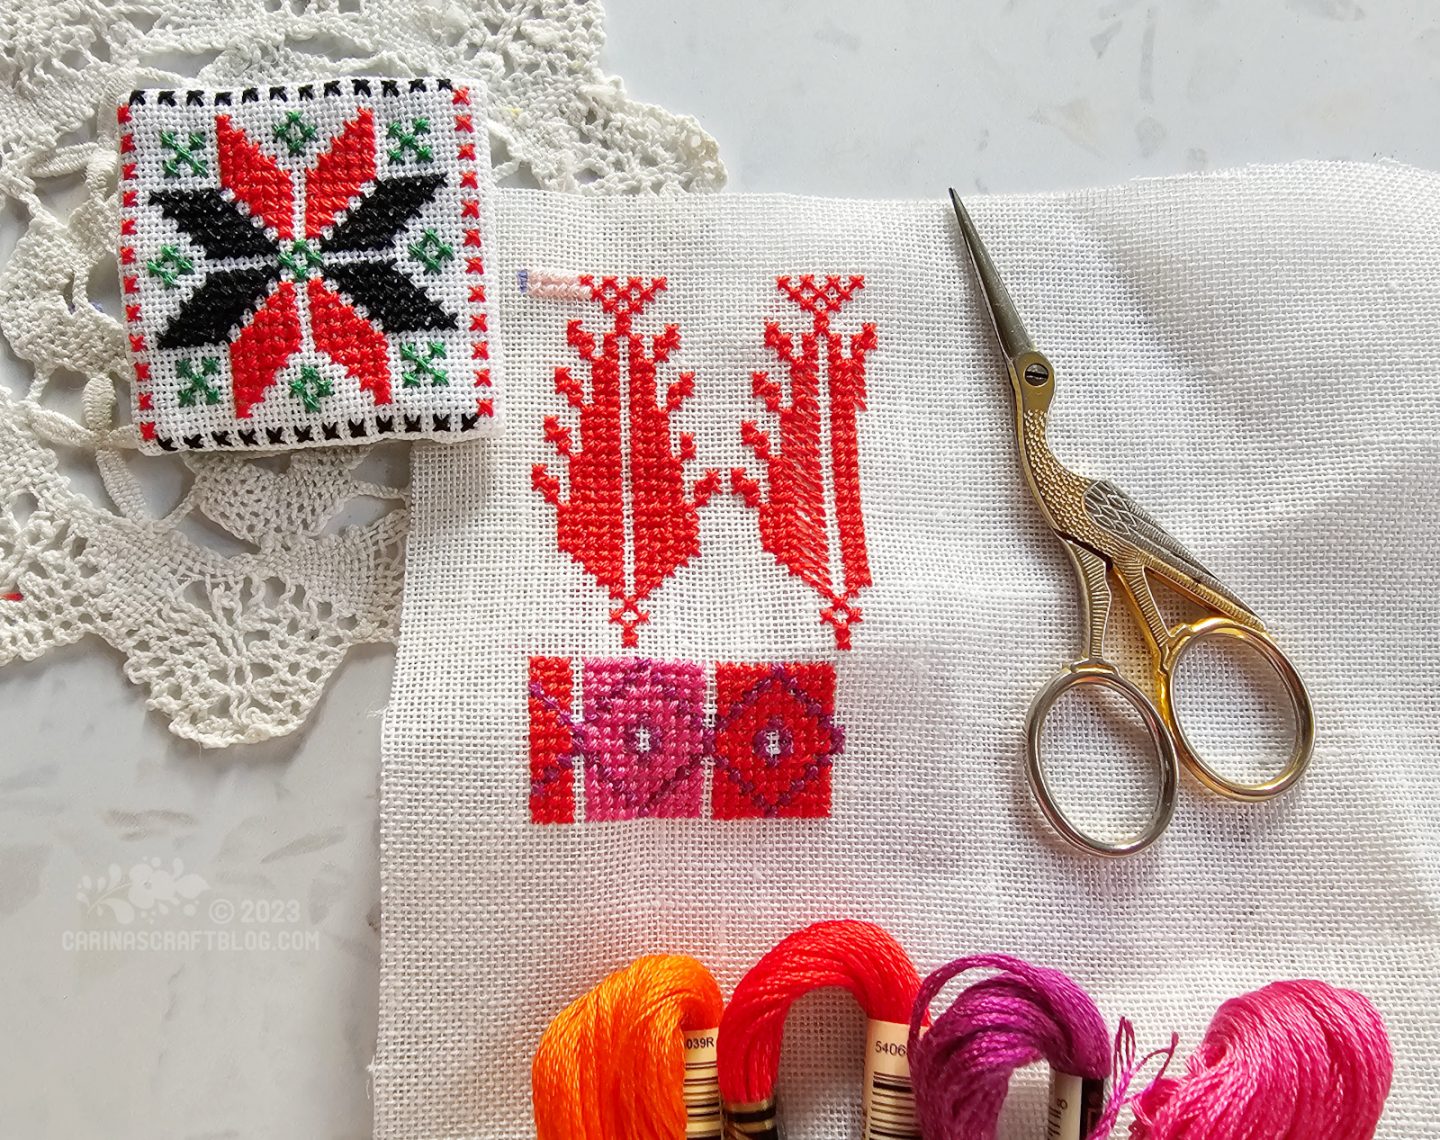 Close overhead view of white fabric partially cross stitched with red and pink colours.
In the top left corner is a small square fabric brooch made from white fabric embroidered with a star design in red and black cross stitches.